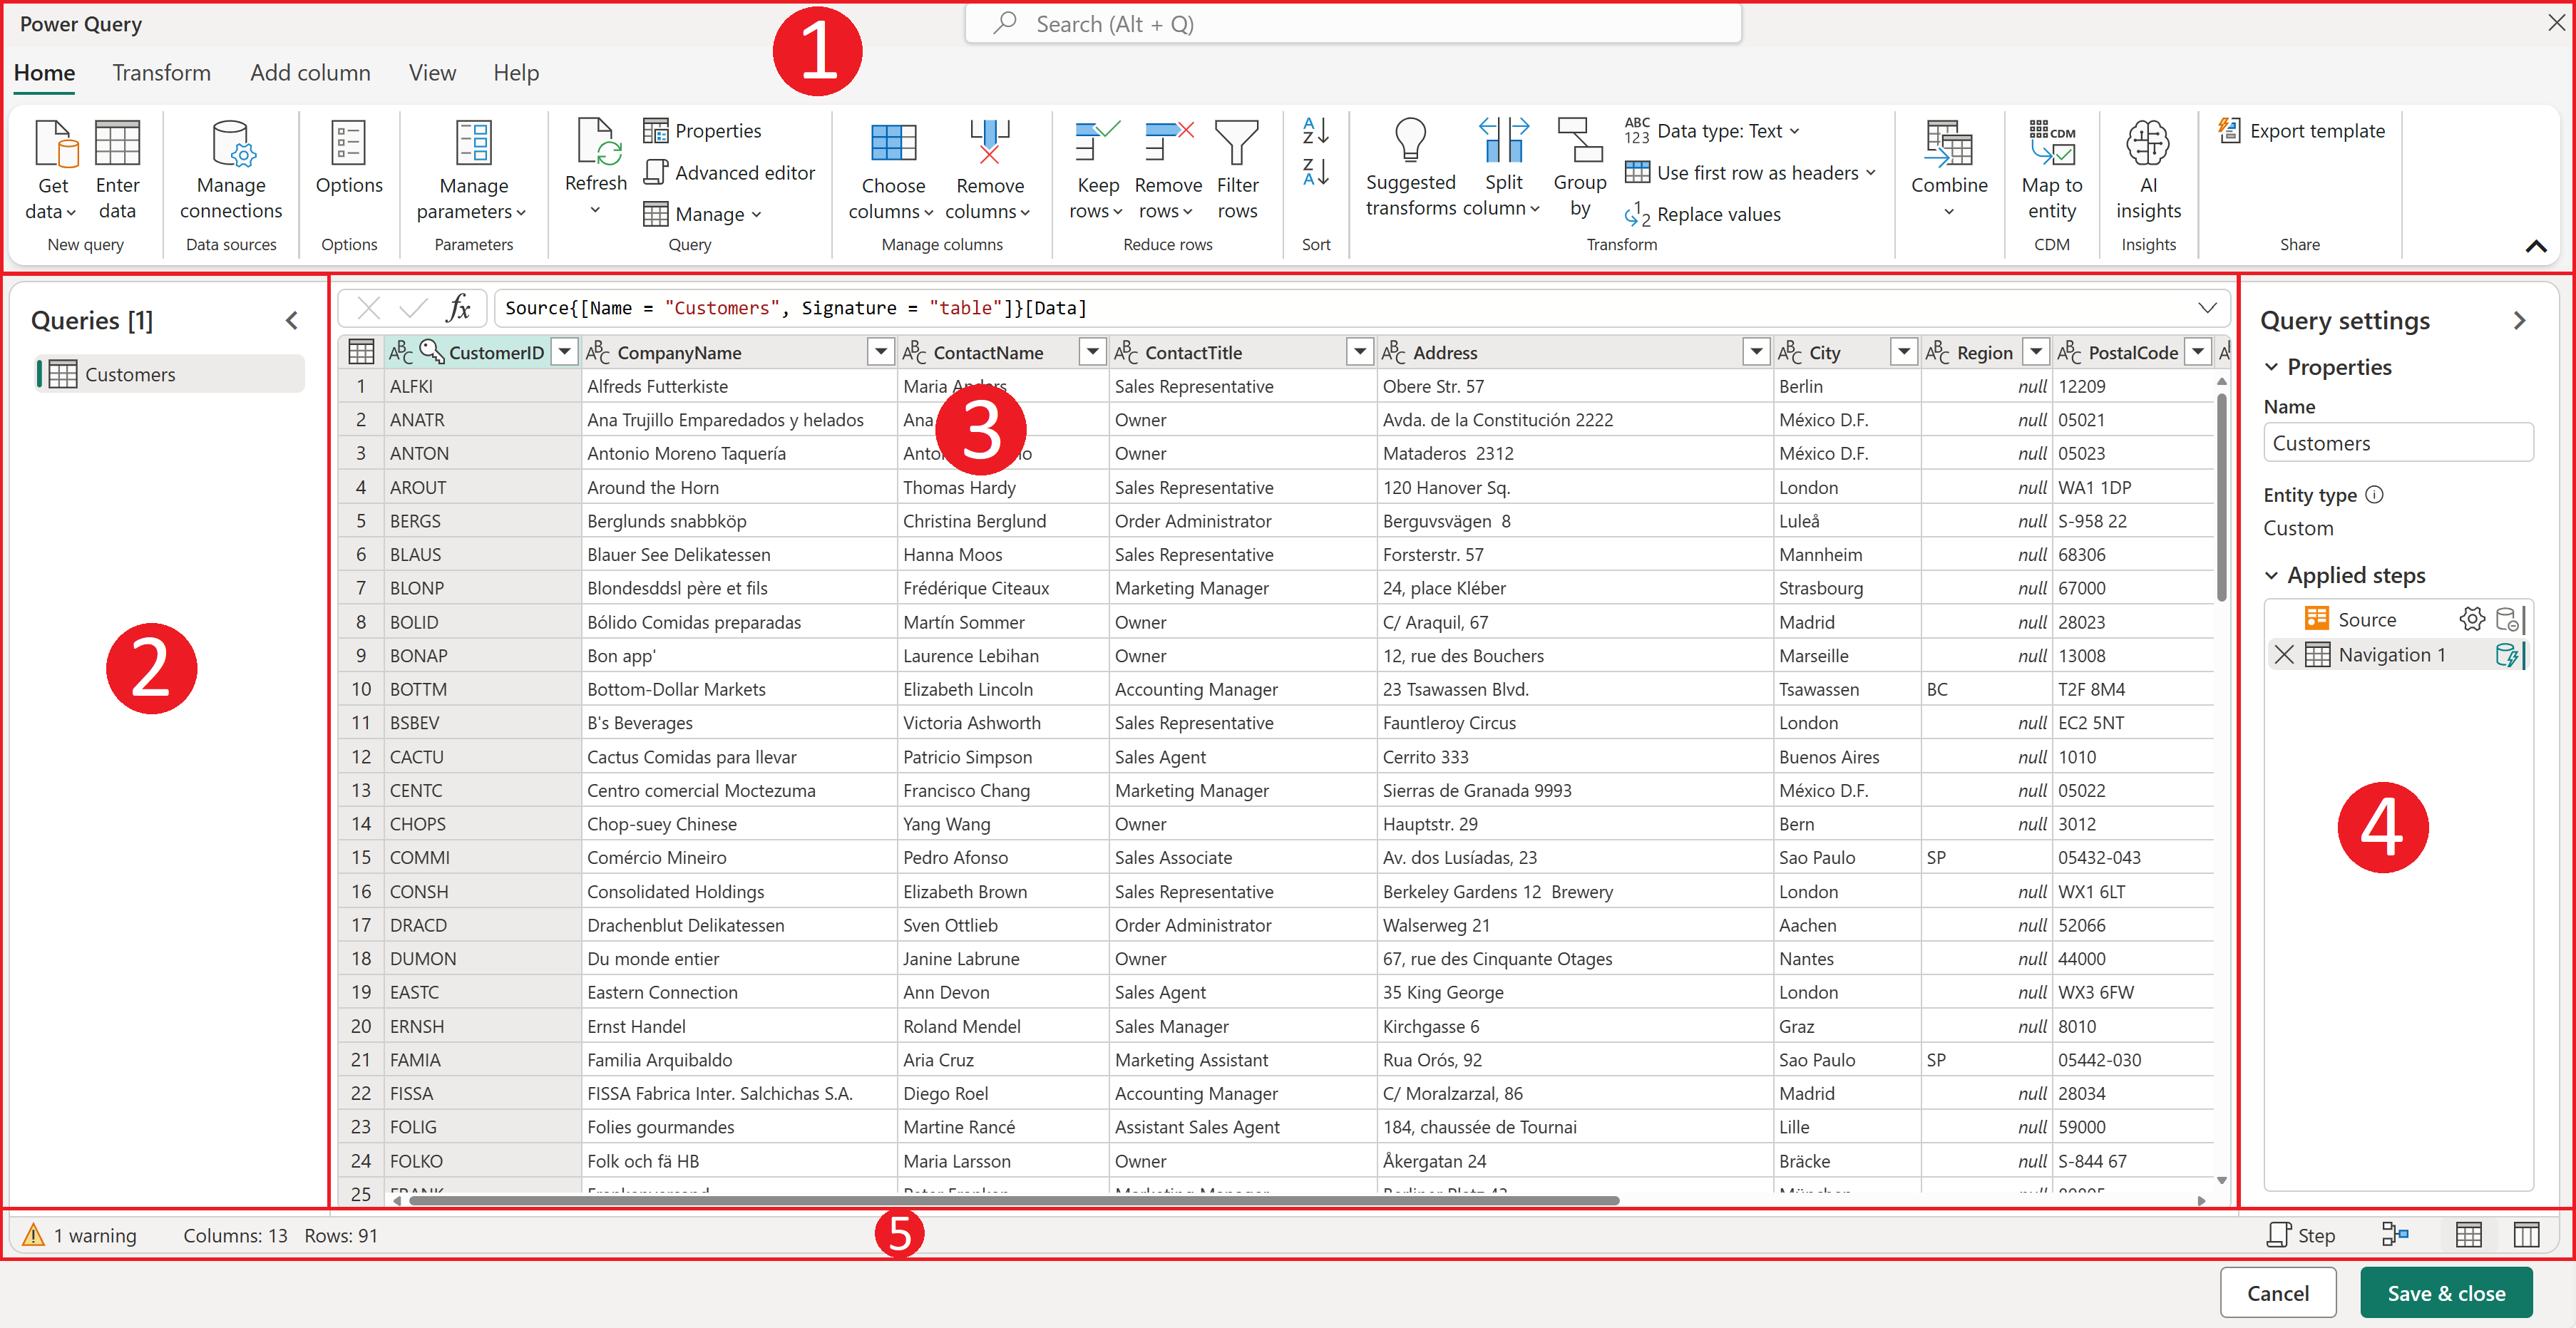 Screenshot of the Power Query user interface with each component outlined and numbered.